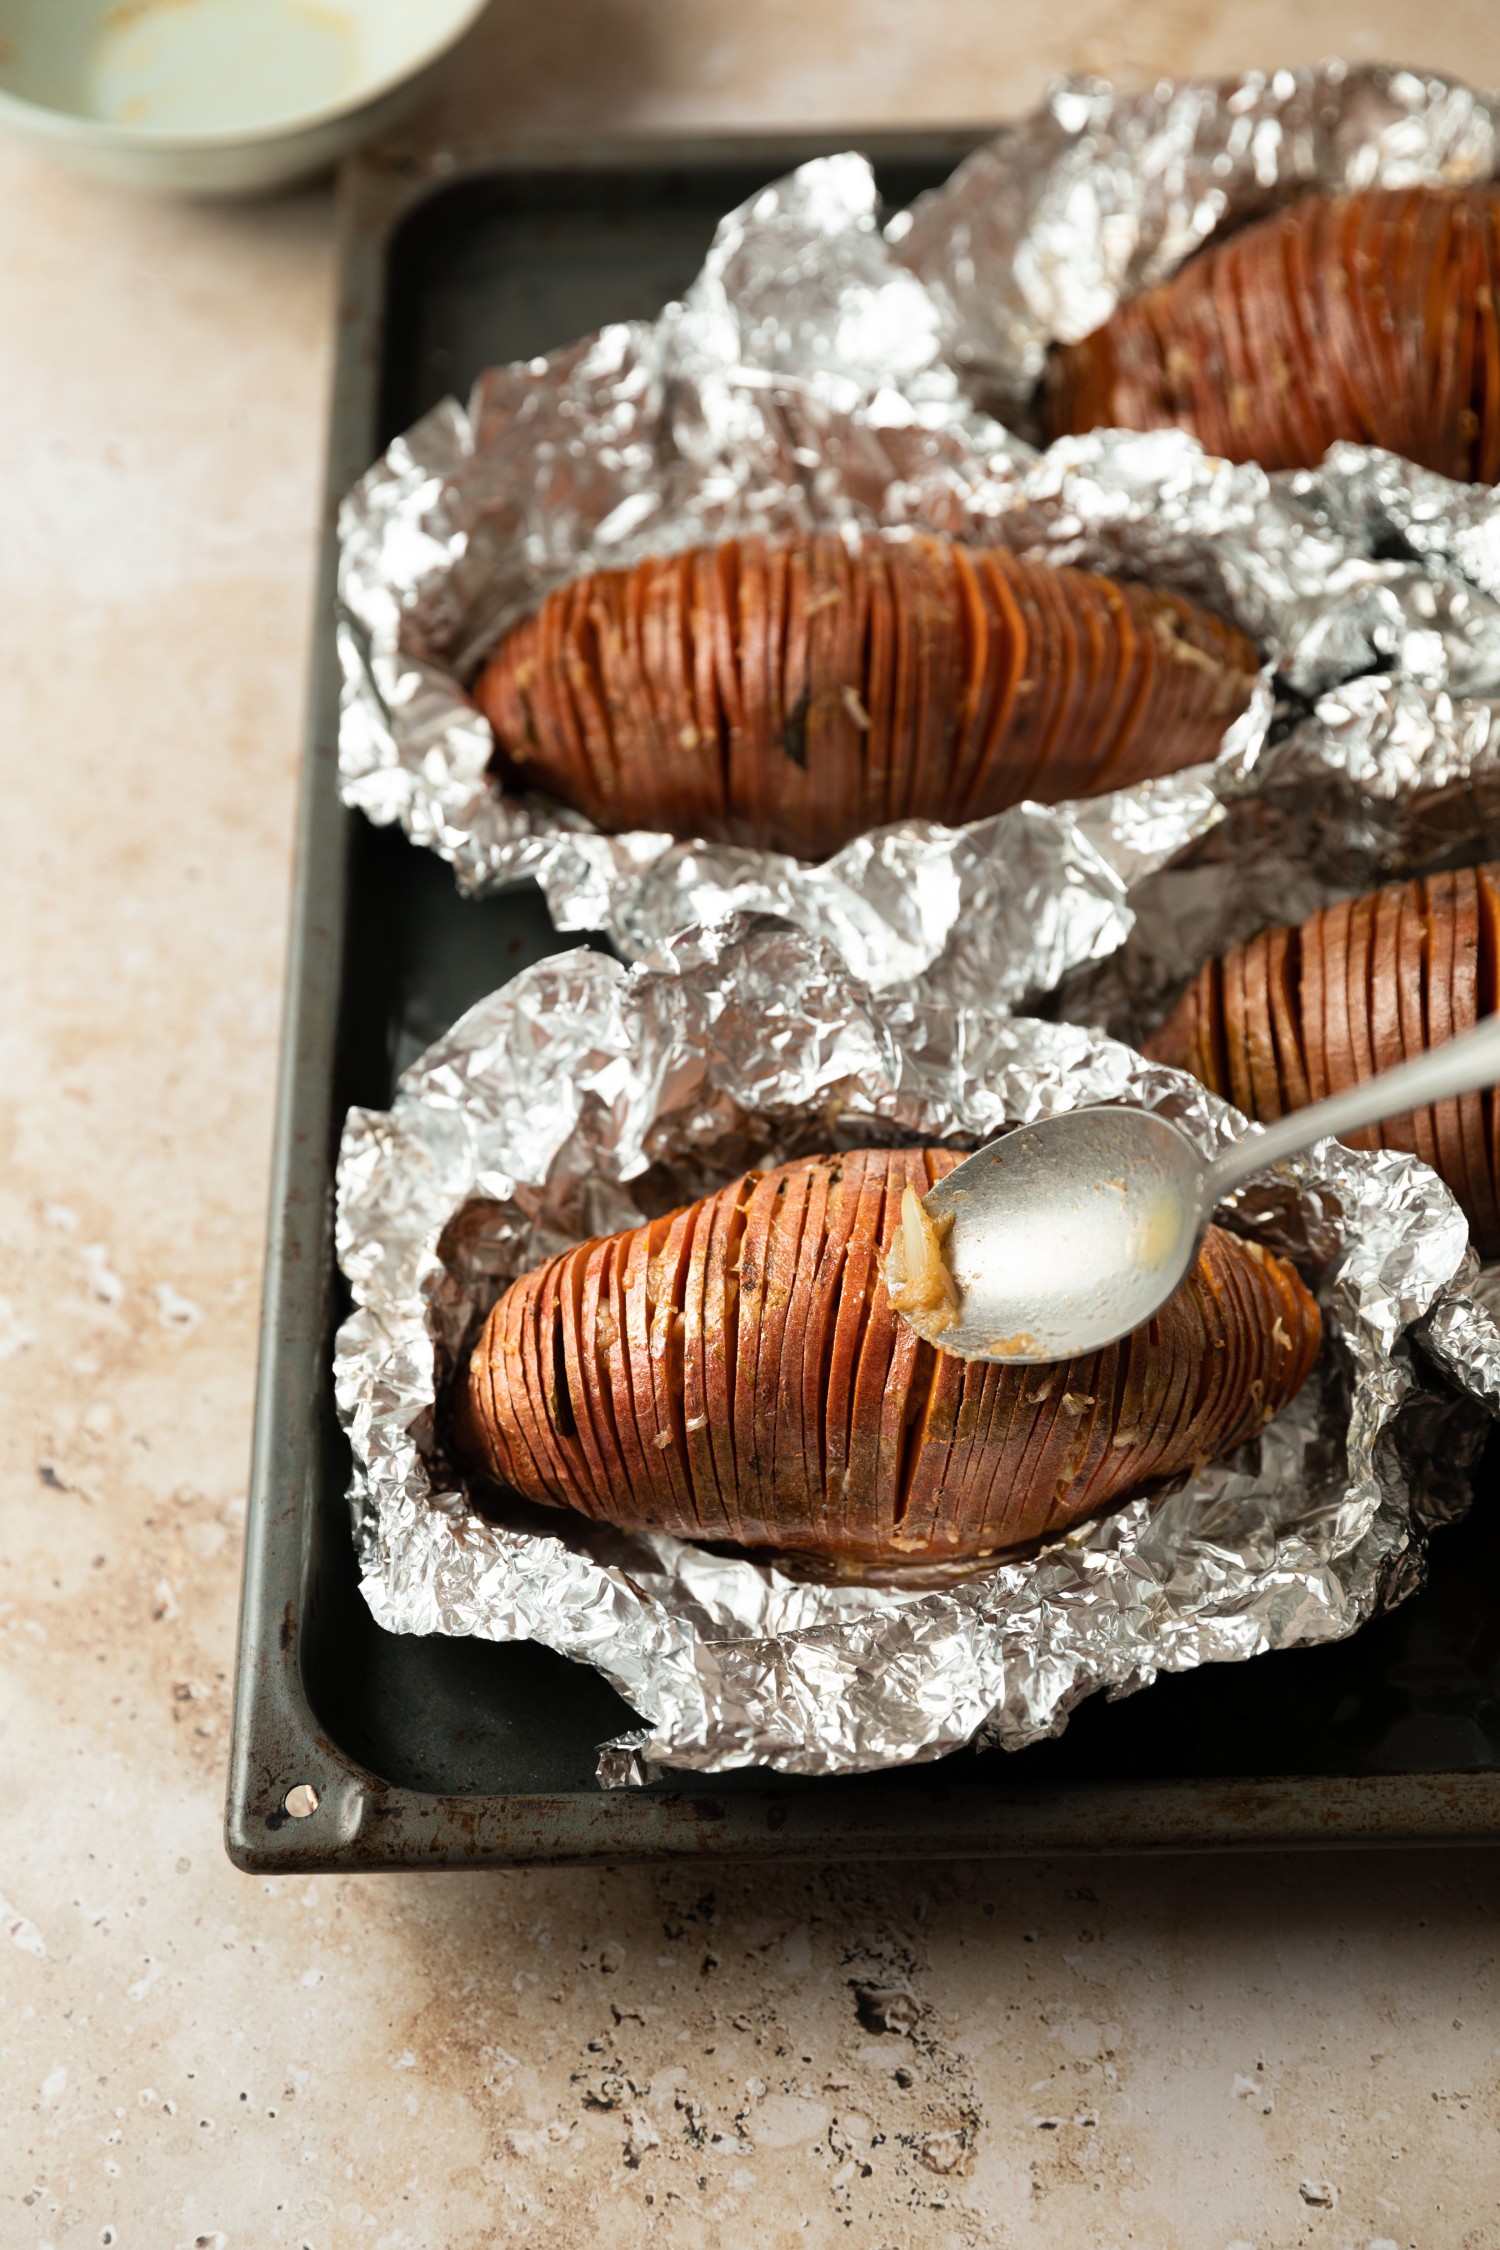 Garlic butter being poured into hasselback sweet potatoes